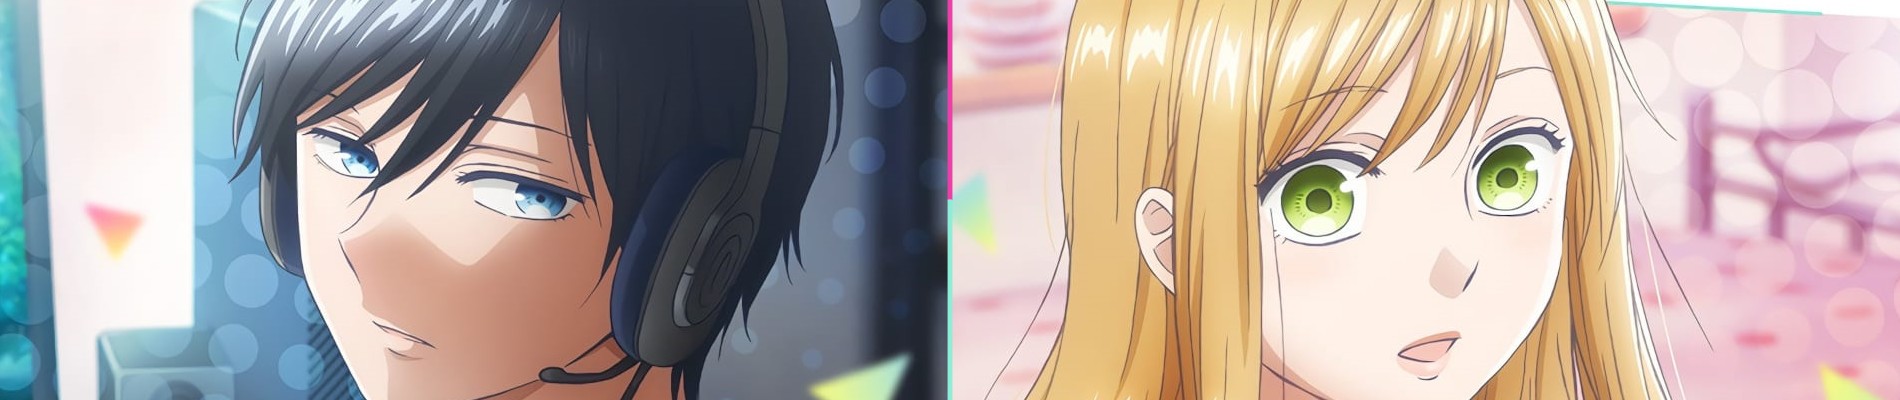 My Love story with Yamada-kun at Lv999: Release date, what to expect, plot,  and more